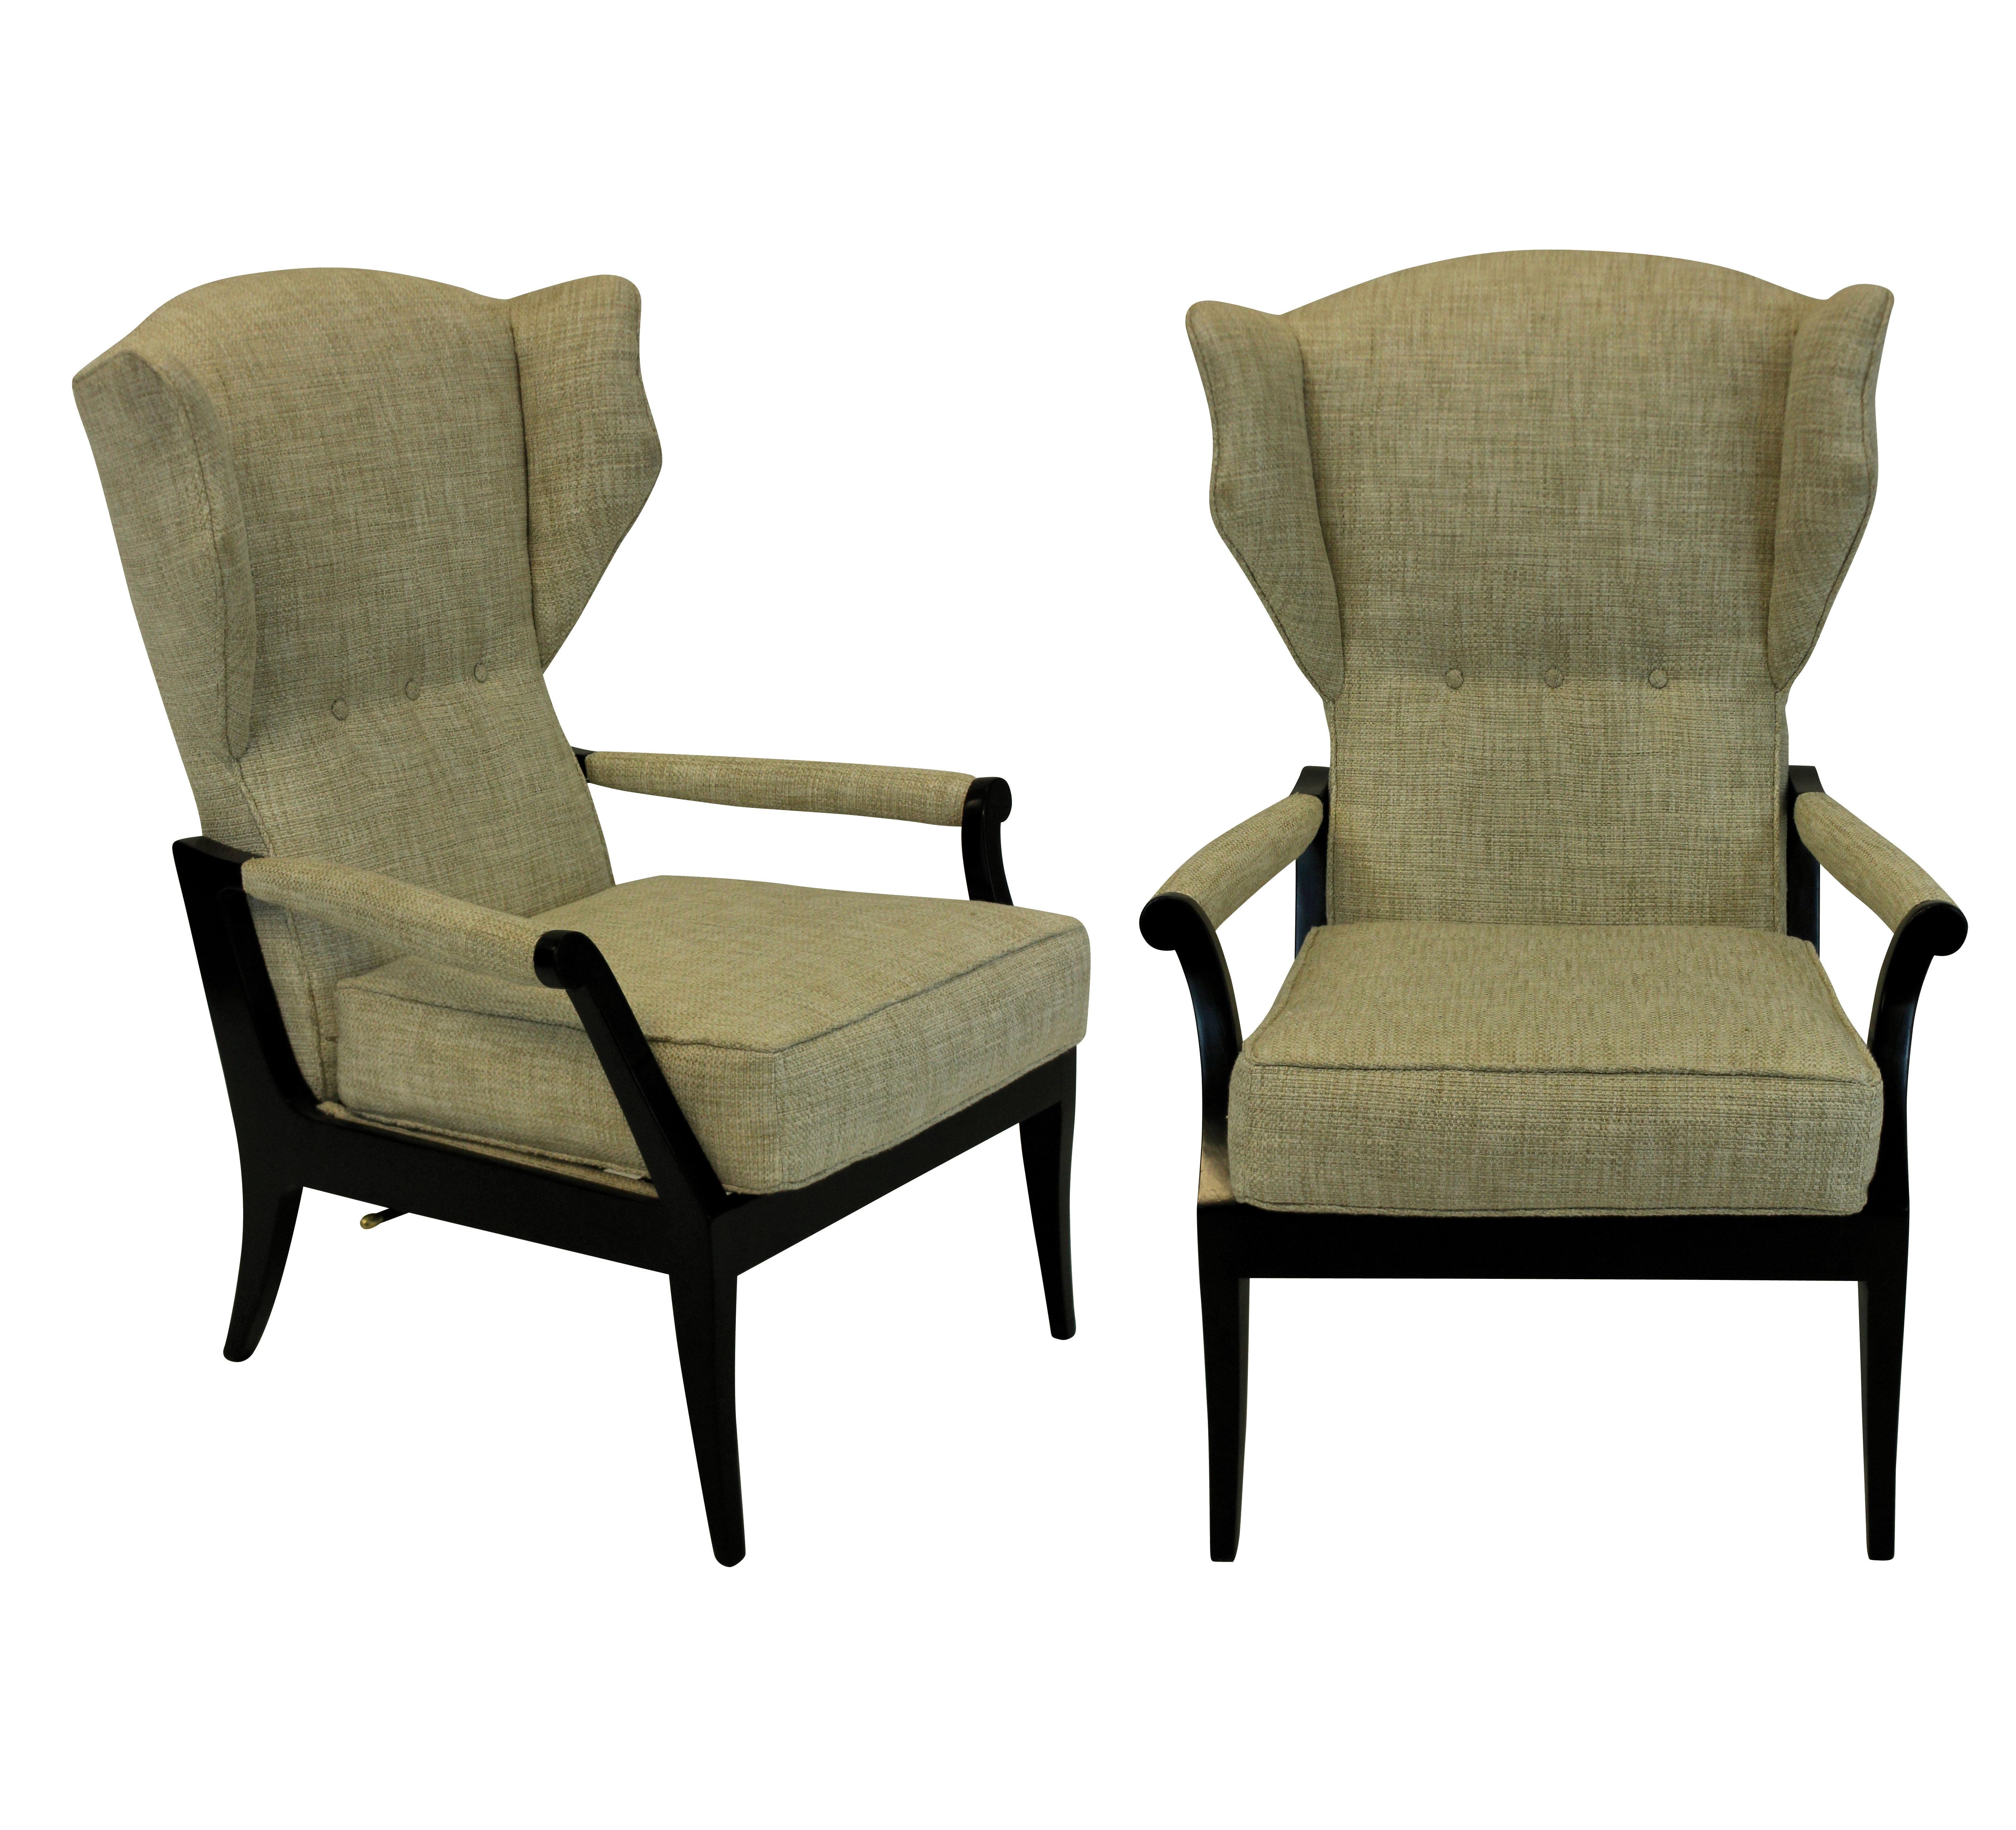 A pair of Italian reclining armchairs of stylish design. In ebonized wood and upholstered in oatmeal twill.
   
  